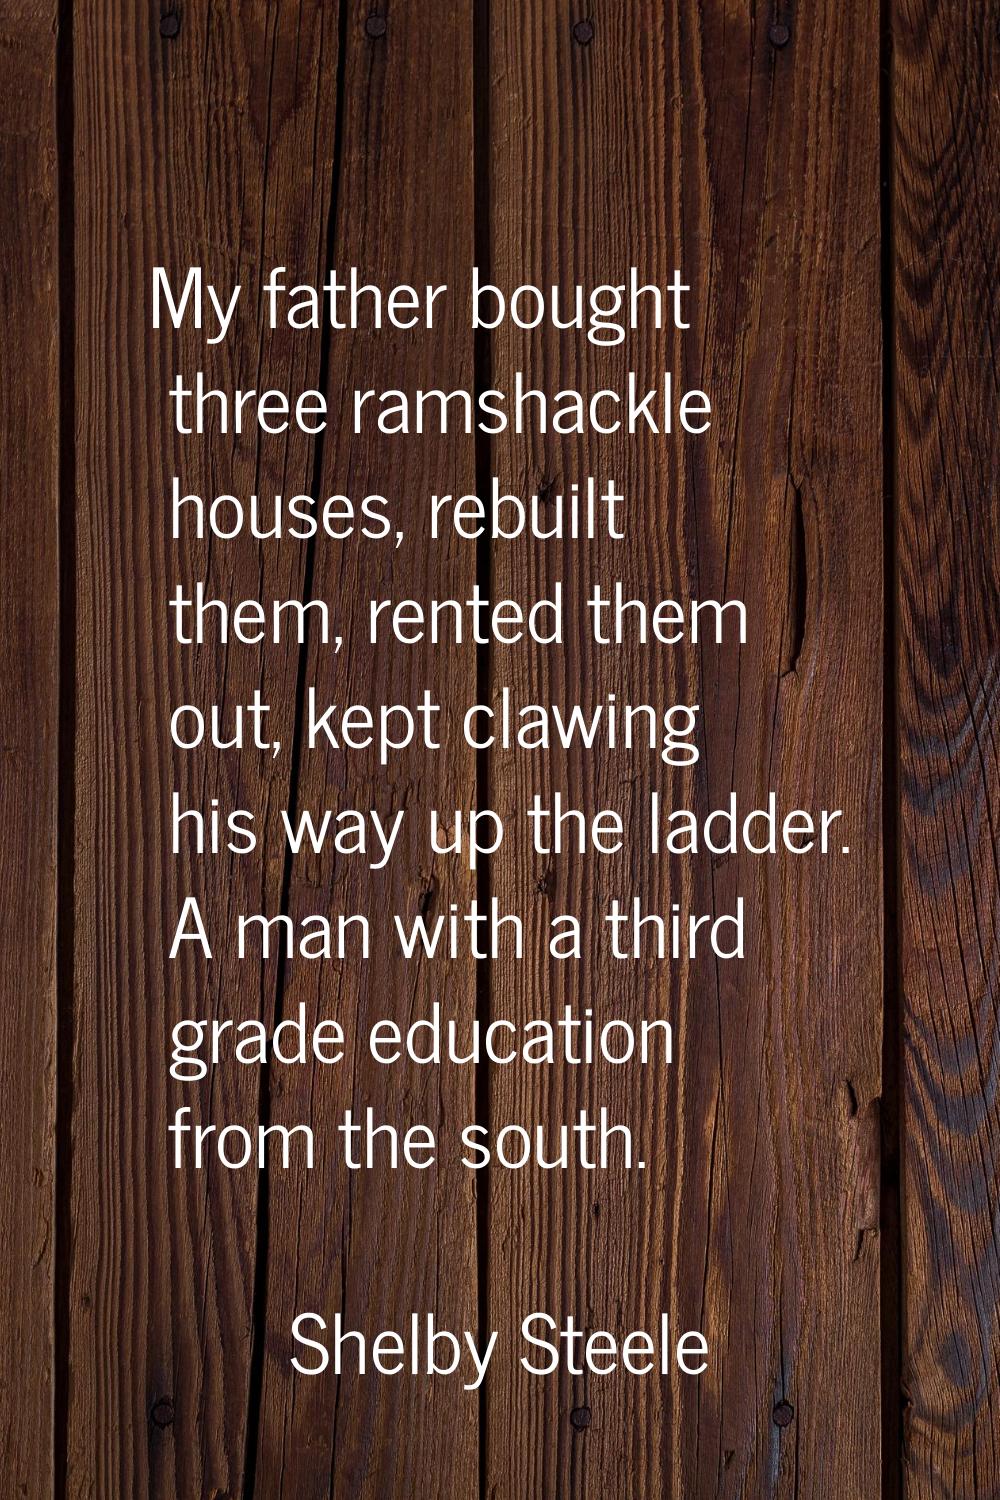 My father bought three ramshackle houses, rebuilt them, rented them out, kept clawing his way up th